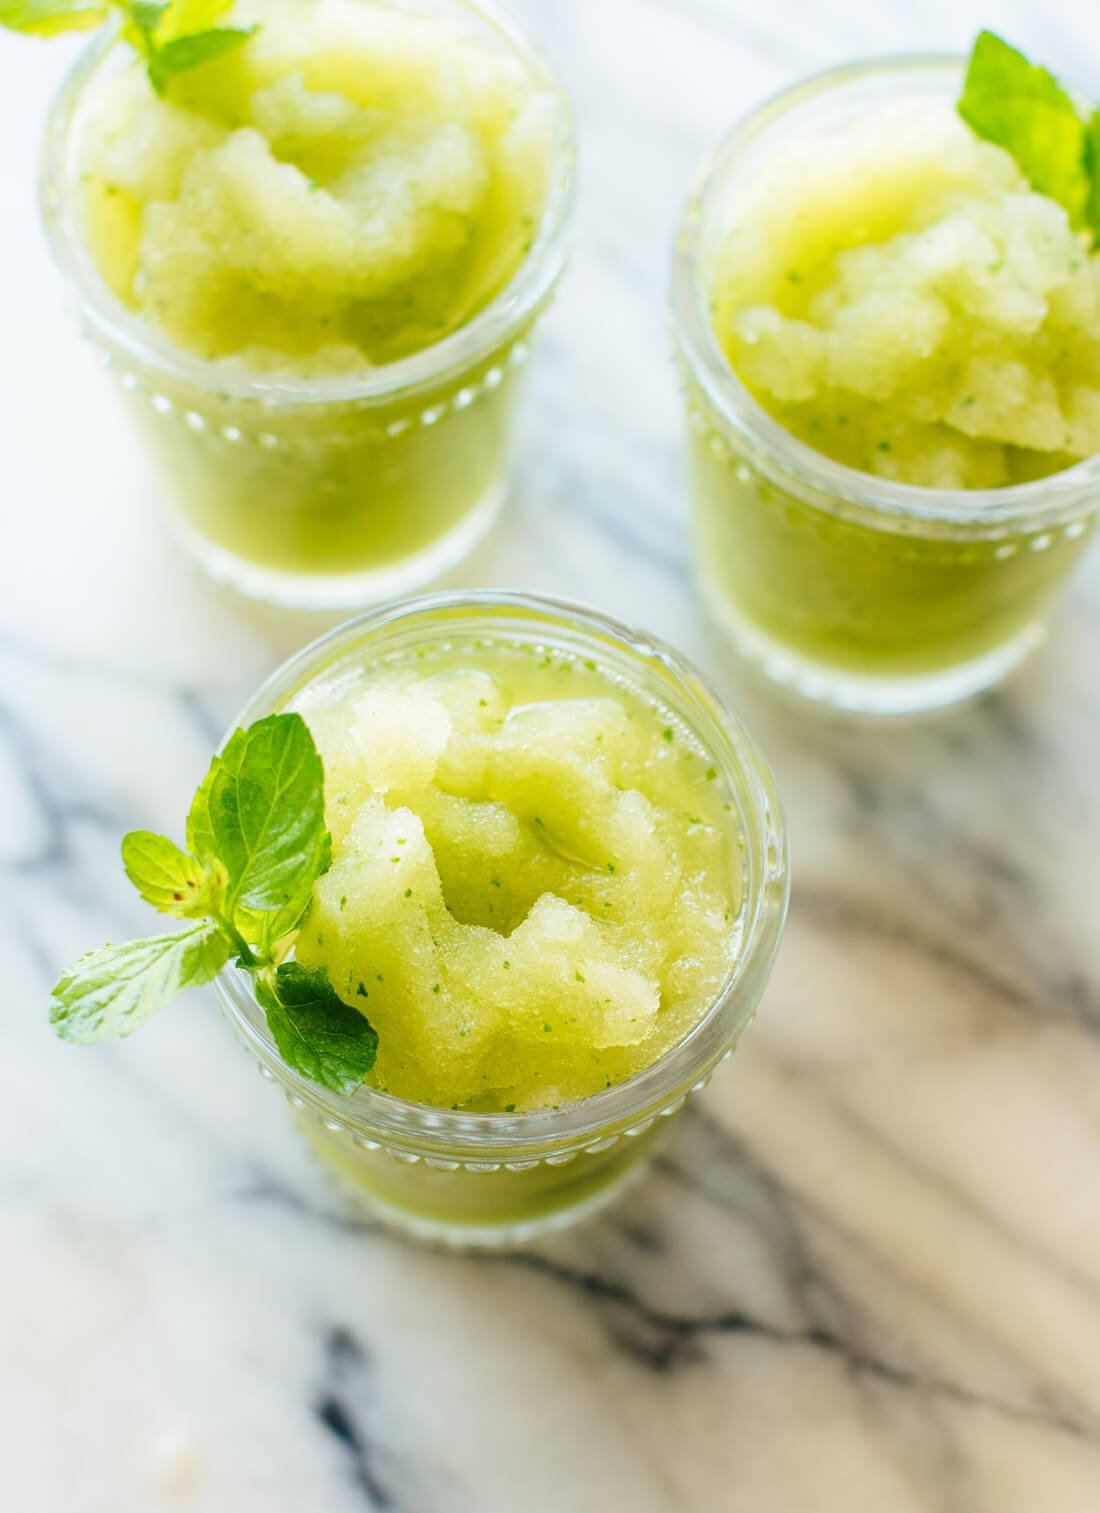 This frozen mint lemonade is ultra refreshing and easy to whip up in a blender! cookieandkate.com